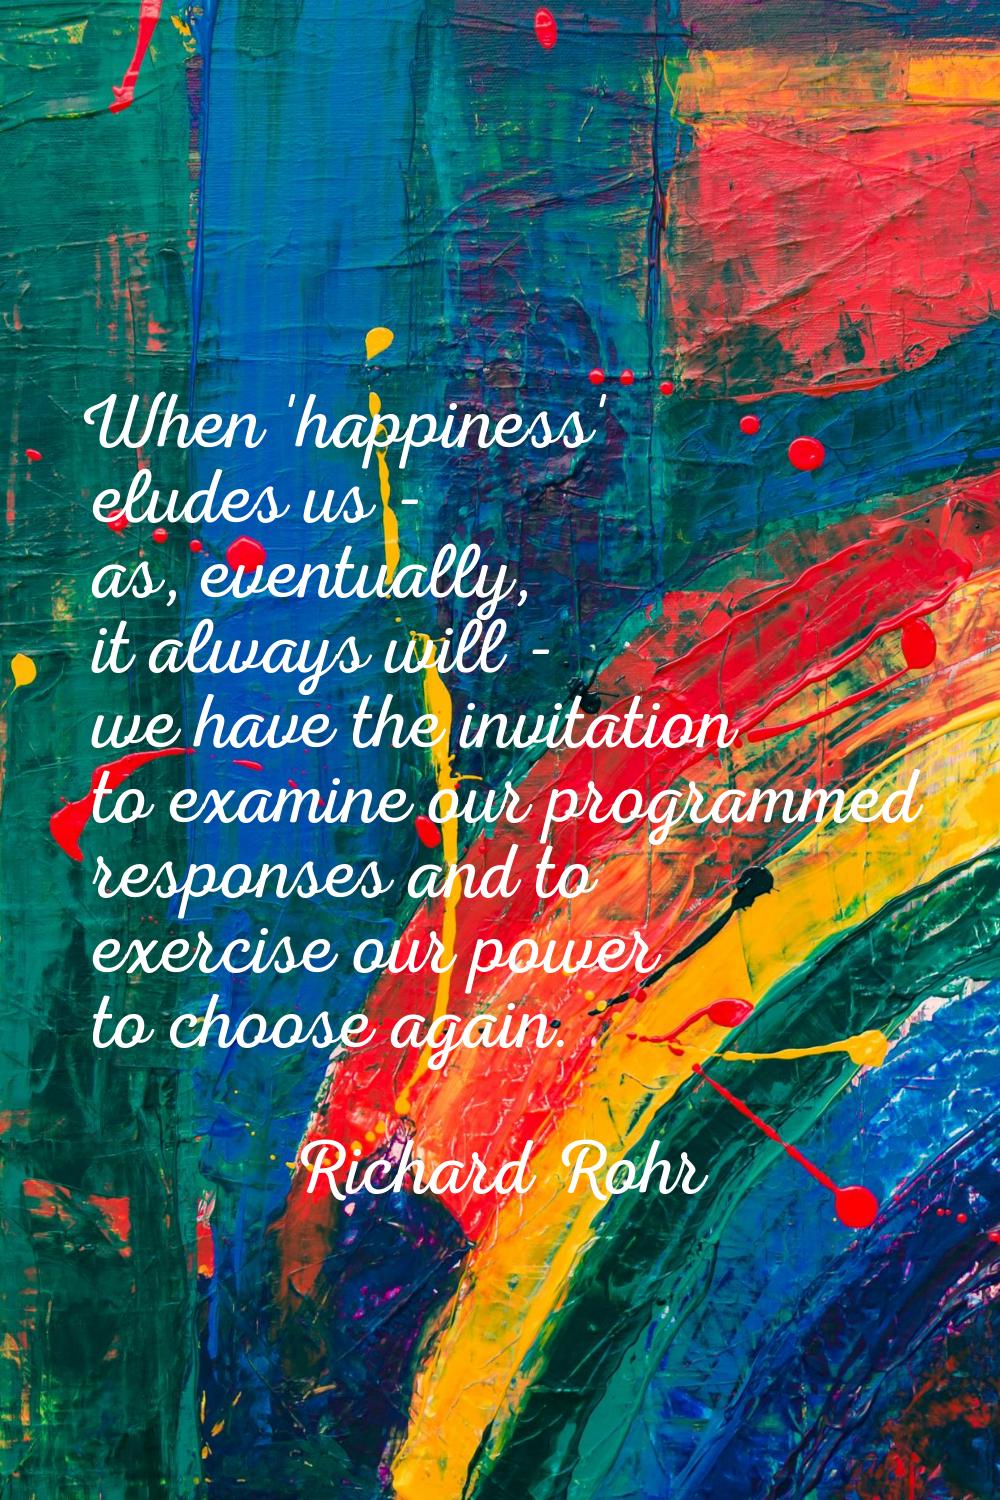 When 'happiness' eludes us - as, eventually, it always will - we have the invitation to examine our